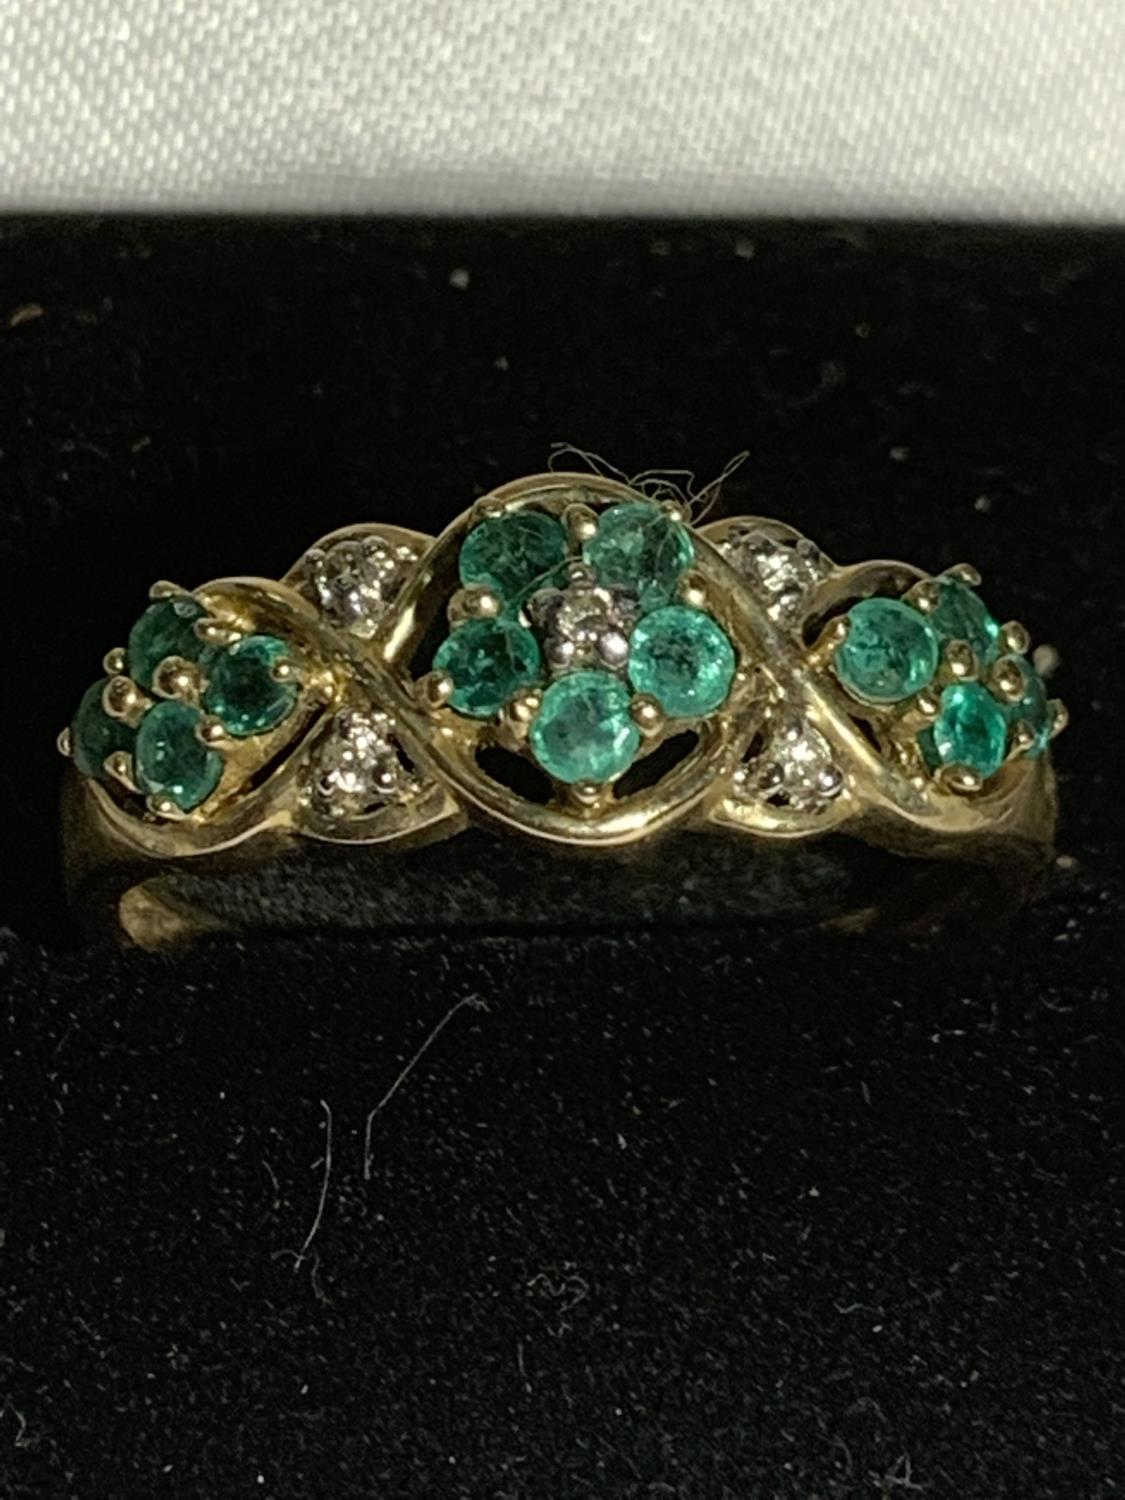 A 9 CARAT GOLD RING WITH GREEN AND CLEAR STONES IN A FLOWER DESIGN SIZE S GROSS WEIGHT 2.7 GRAMS